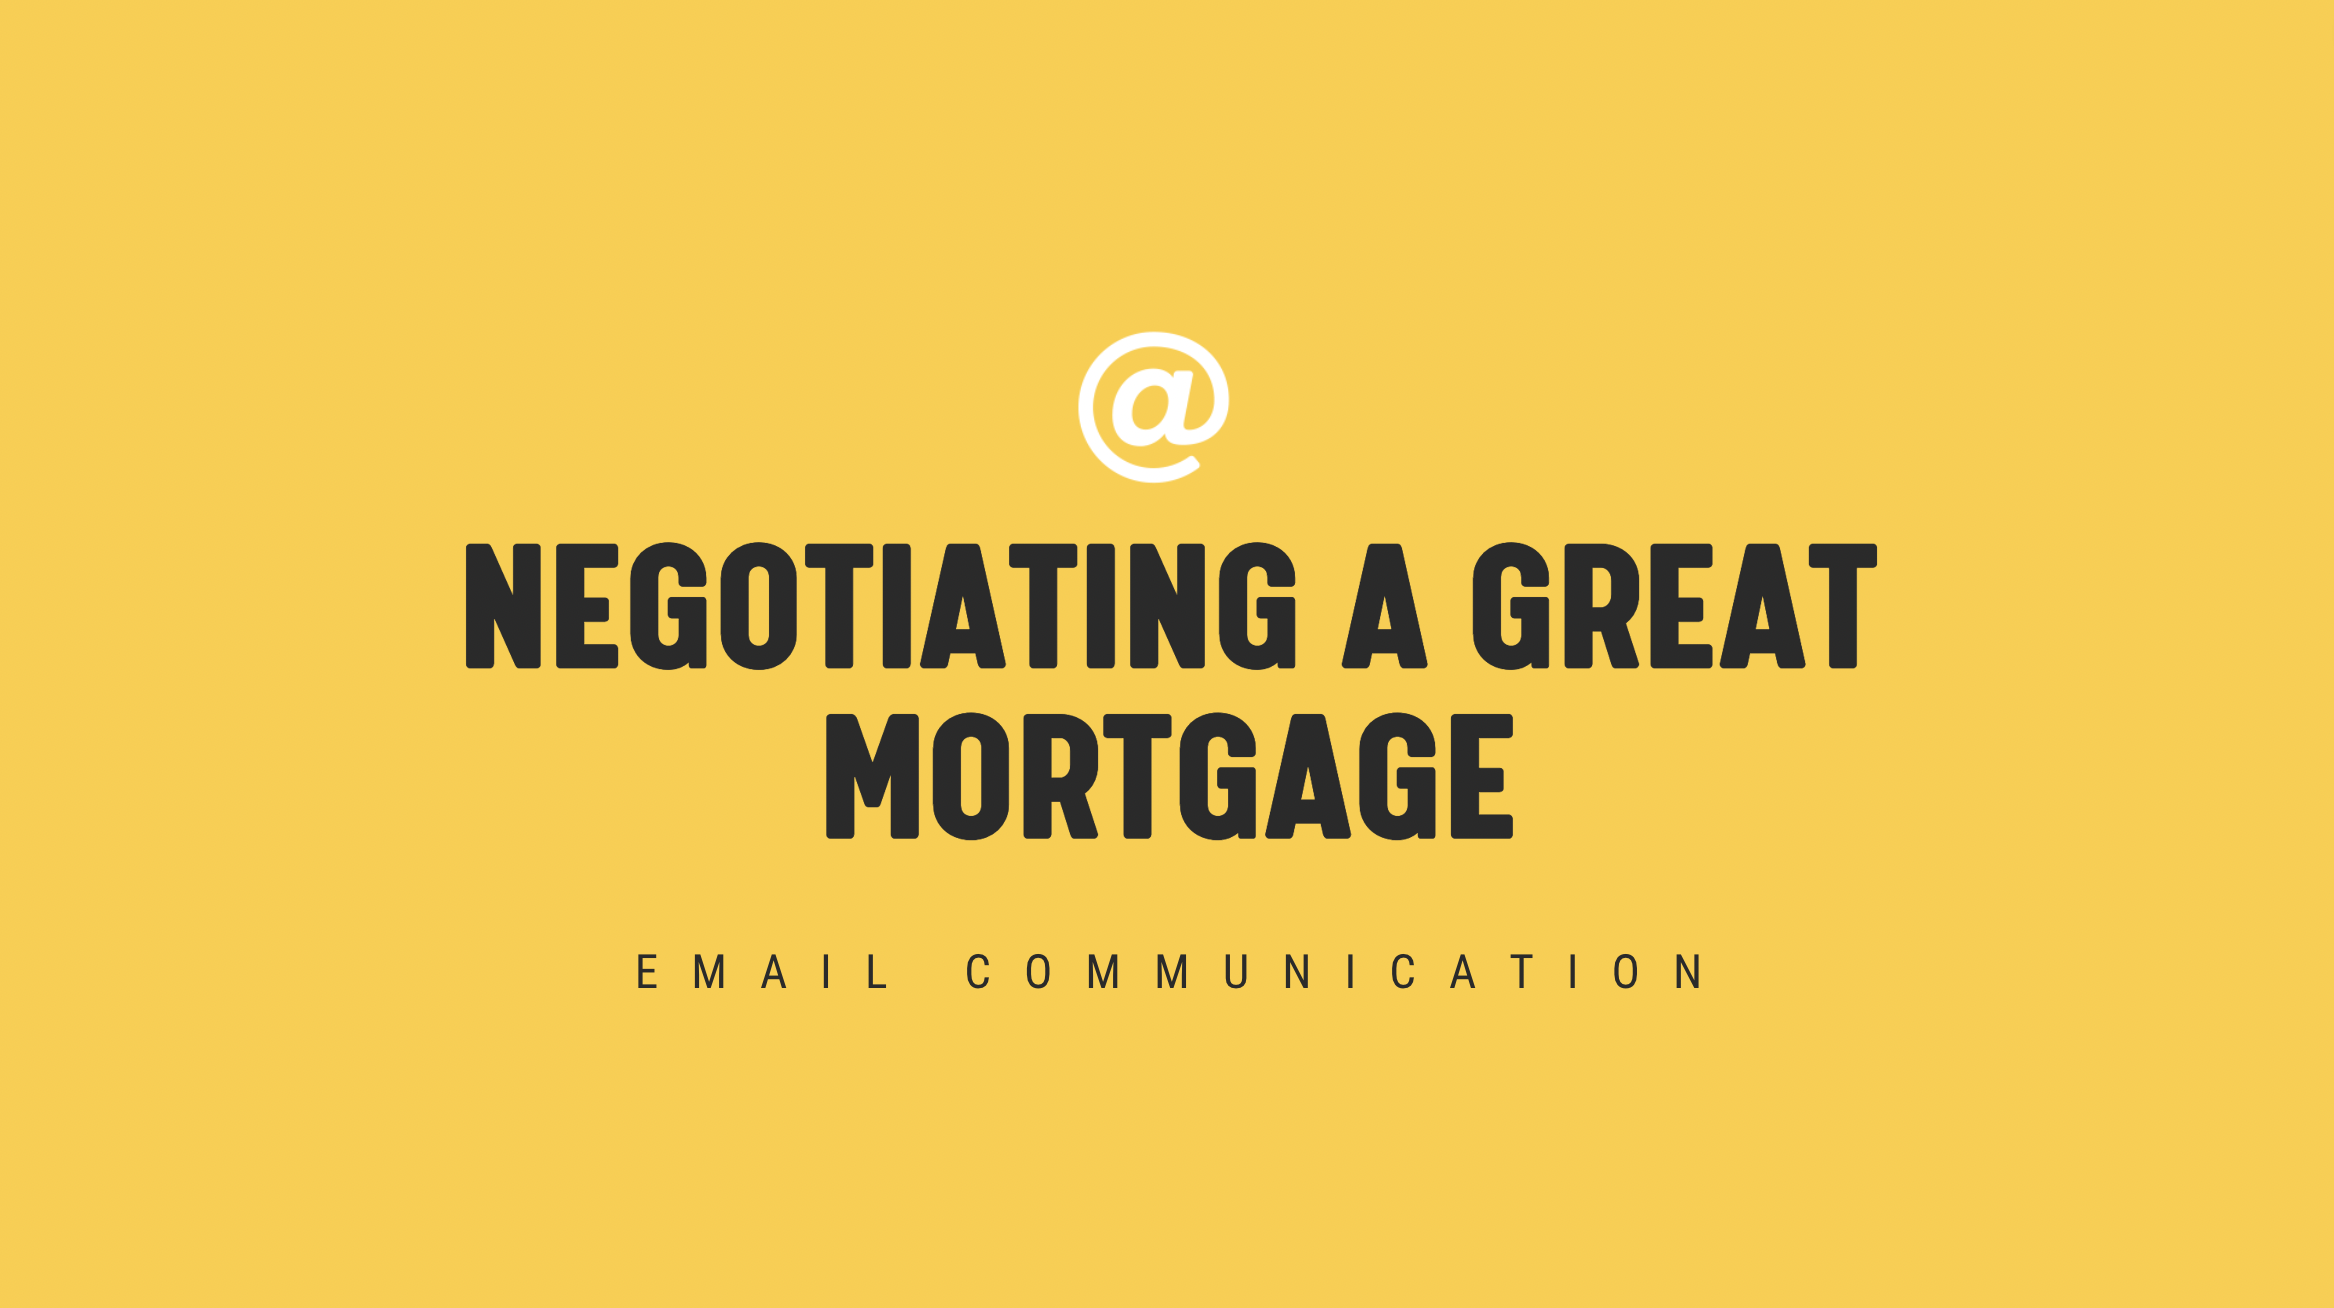 [NEW] Negotiating a Great Mortgage - Single Email